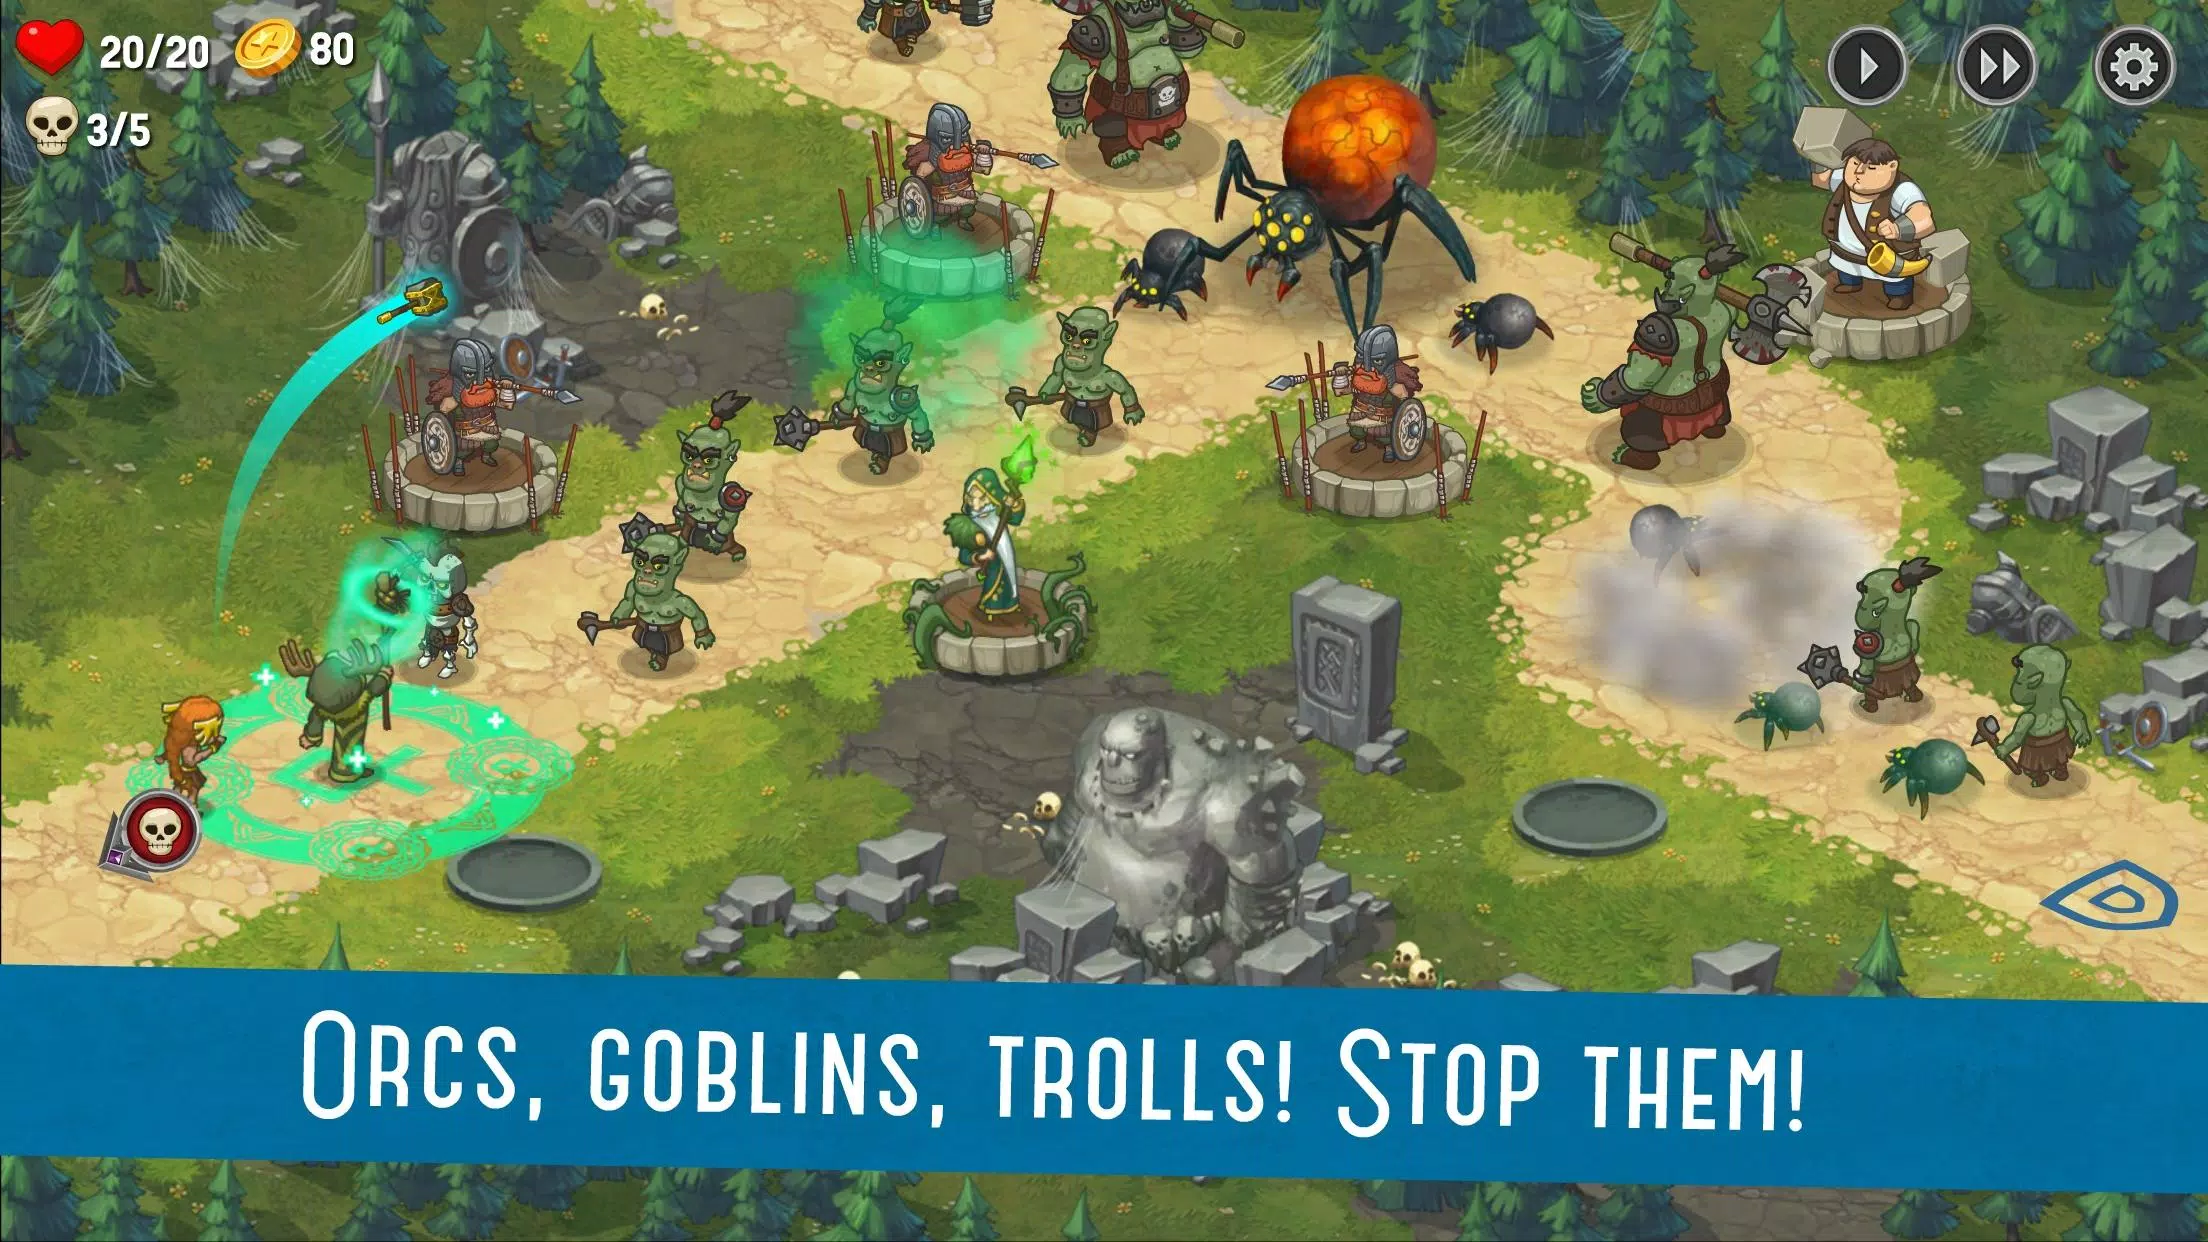 Tower Defense: Orc Army - Free Play & No Download